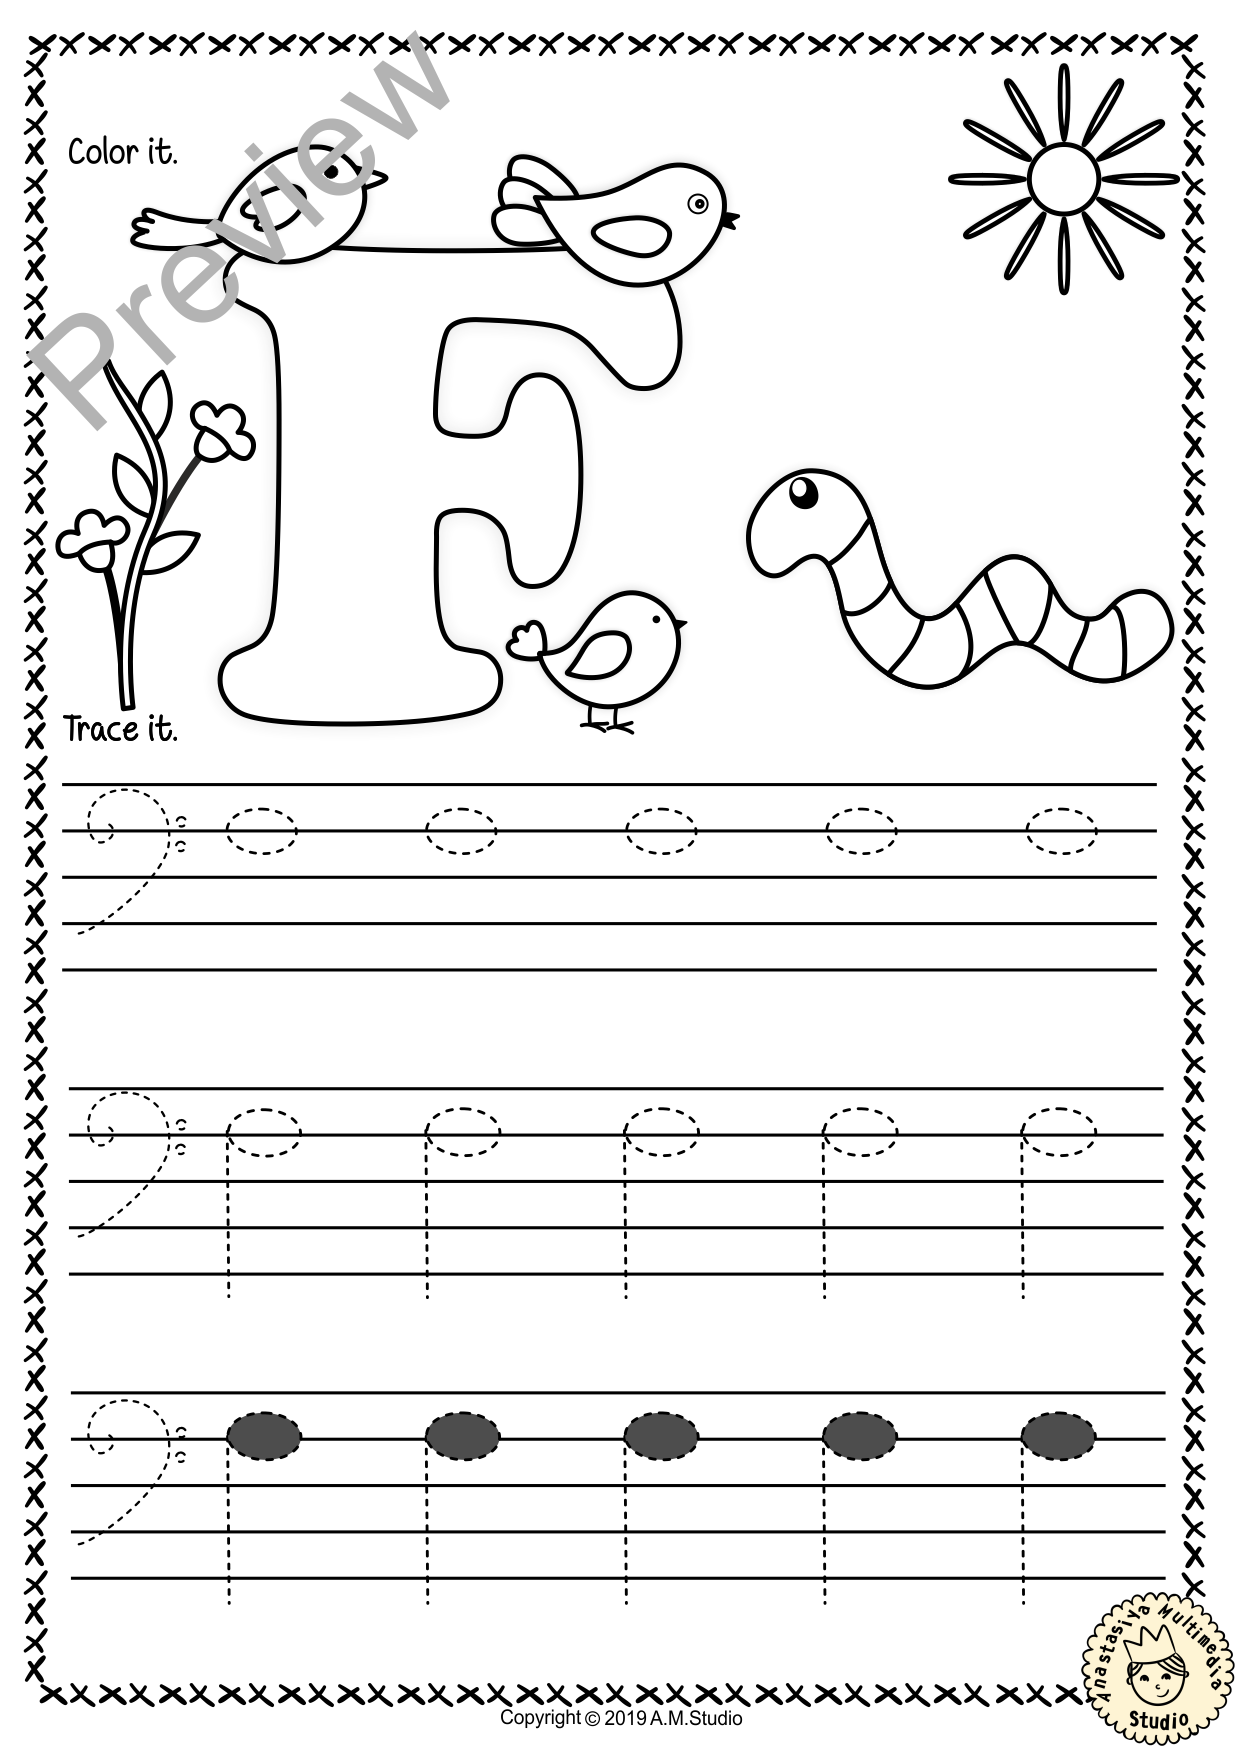 Bass Clef Tracing Music Notes Worksheets for Spring (img # 4)